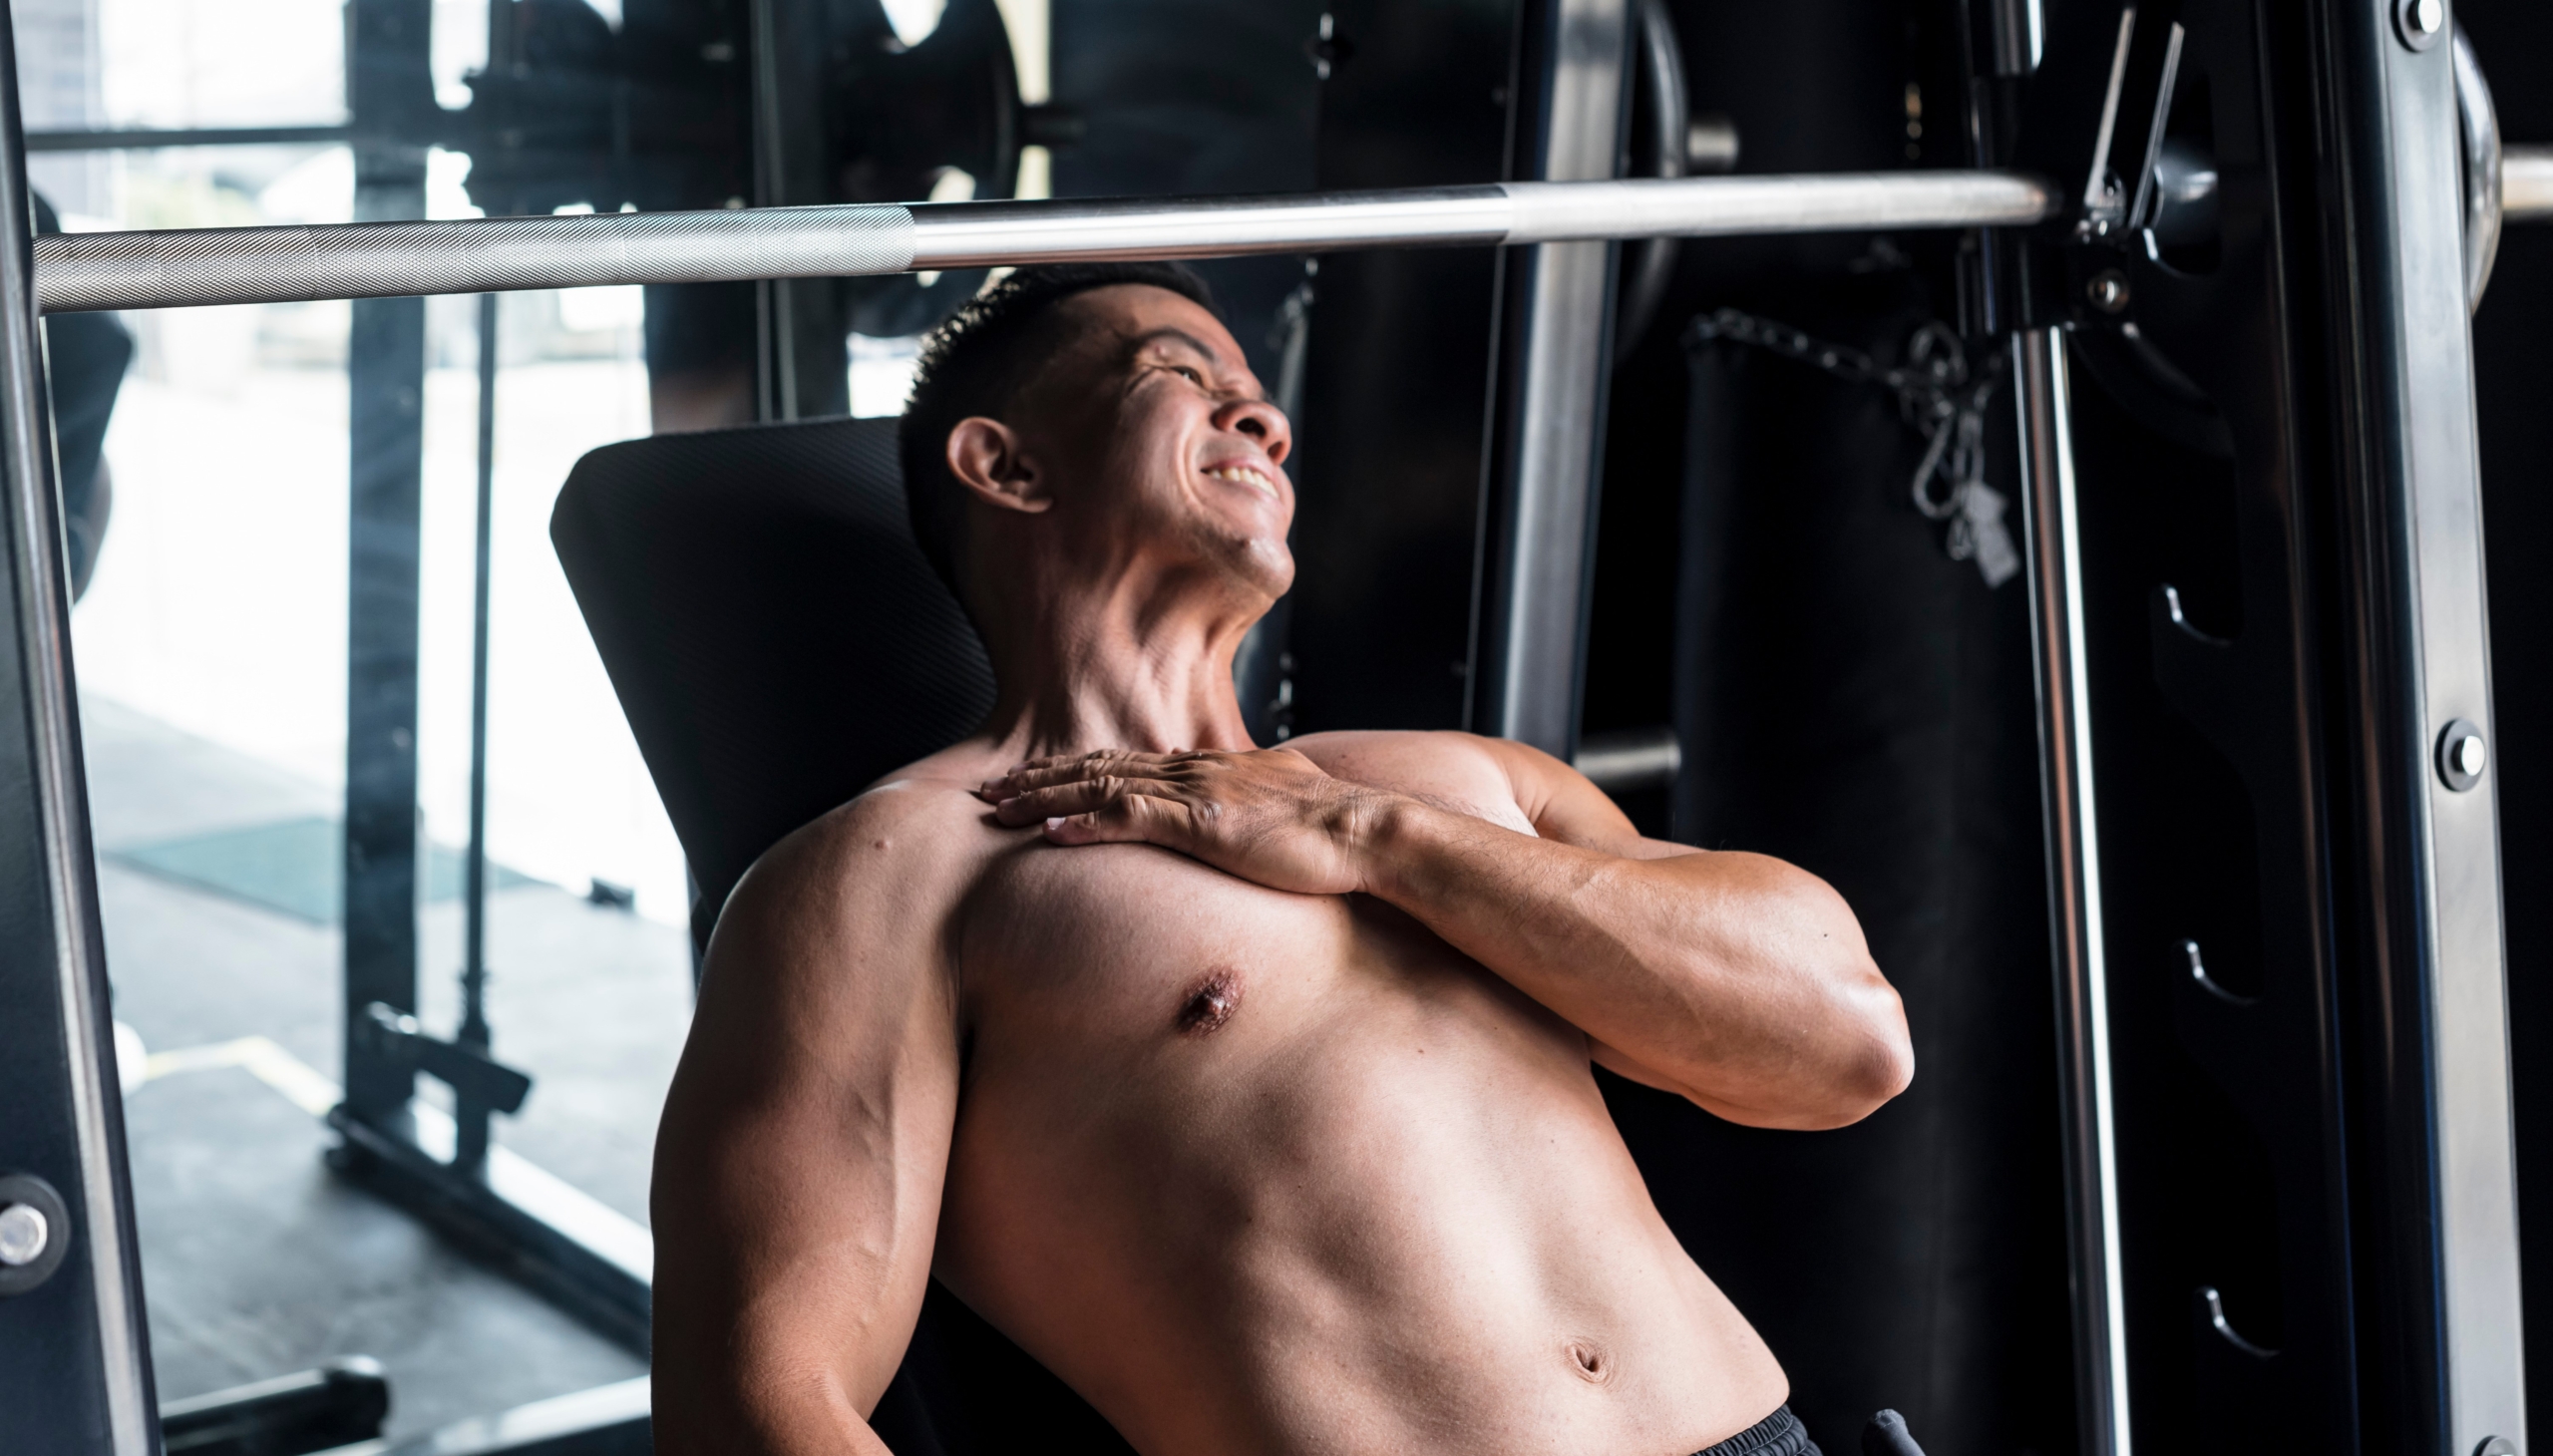 Shoulder physiotherapy can stop bench press pain